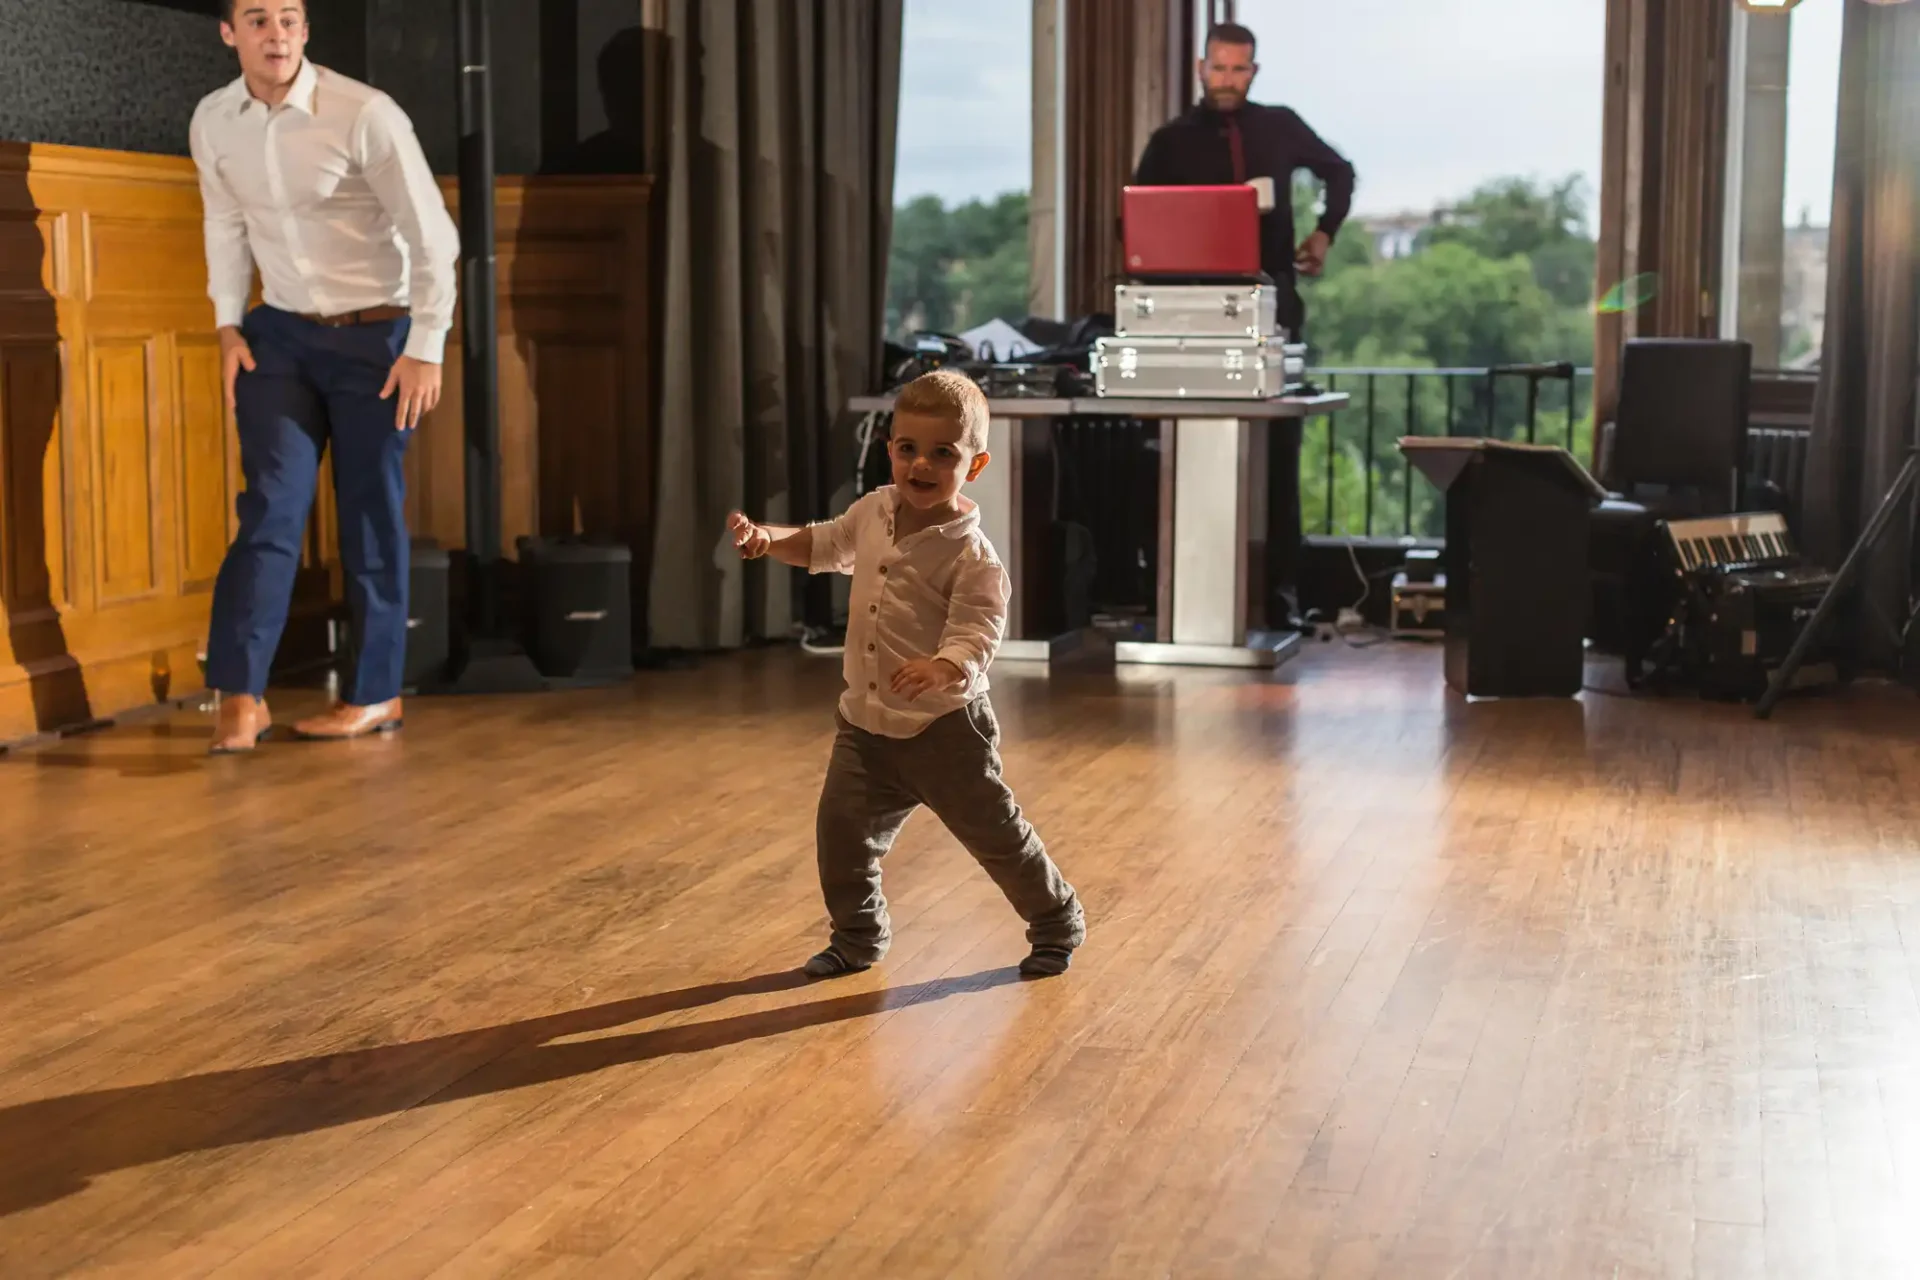 A young boy dances enthusiastically on a wooden floor at a social event, with a dj and another guest visible in the background.